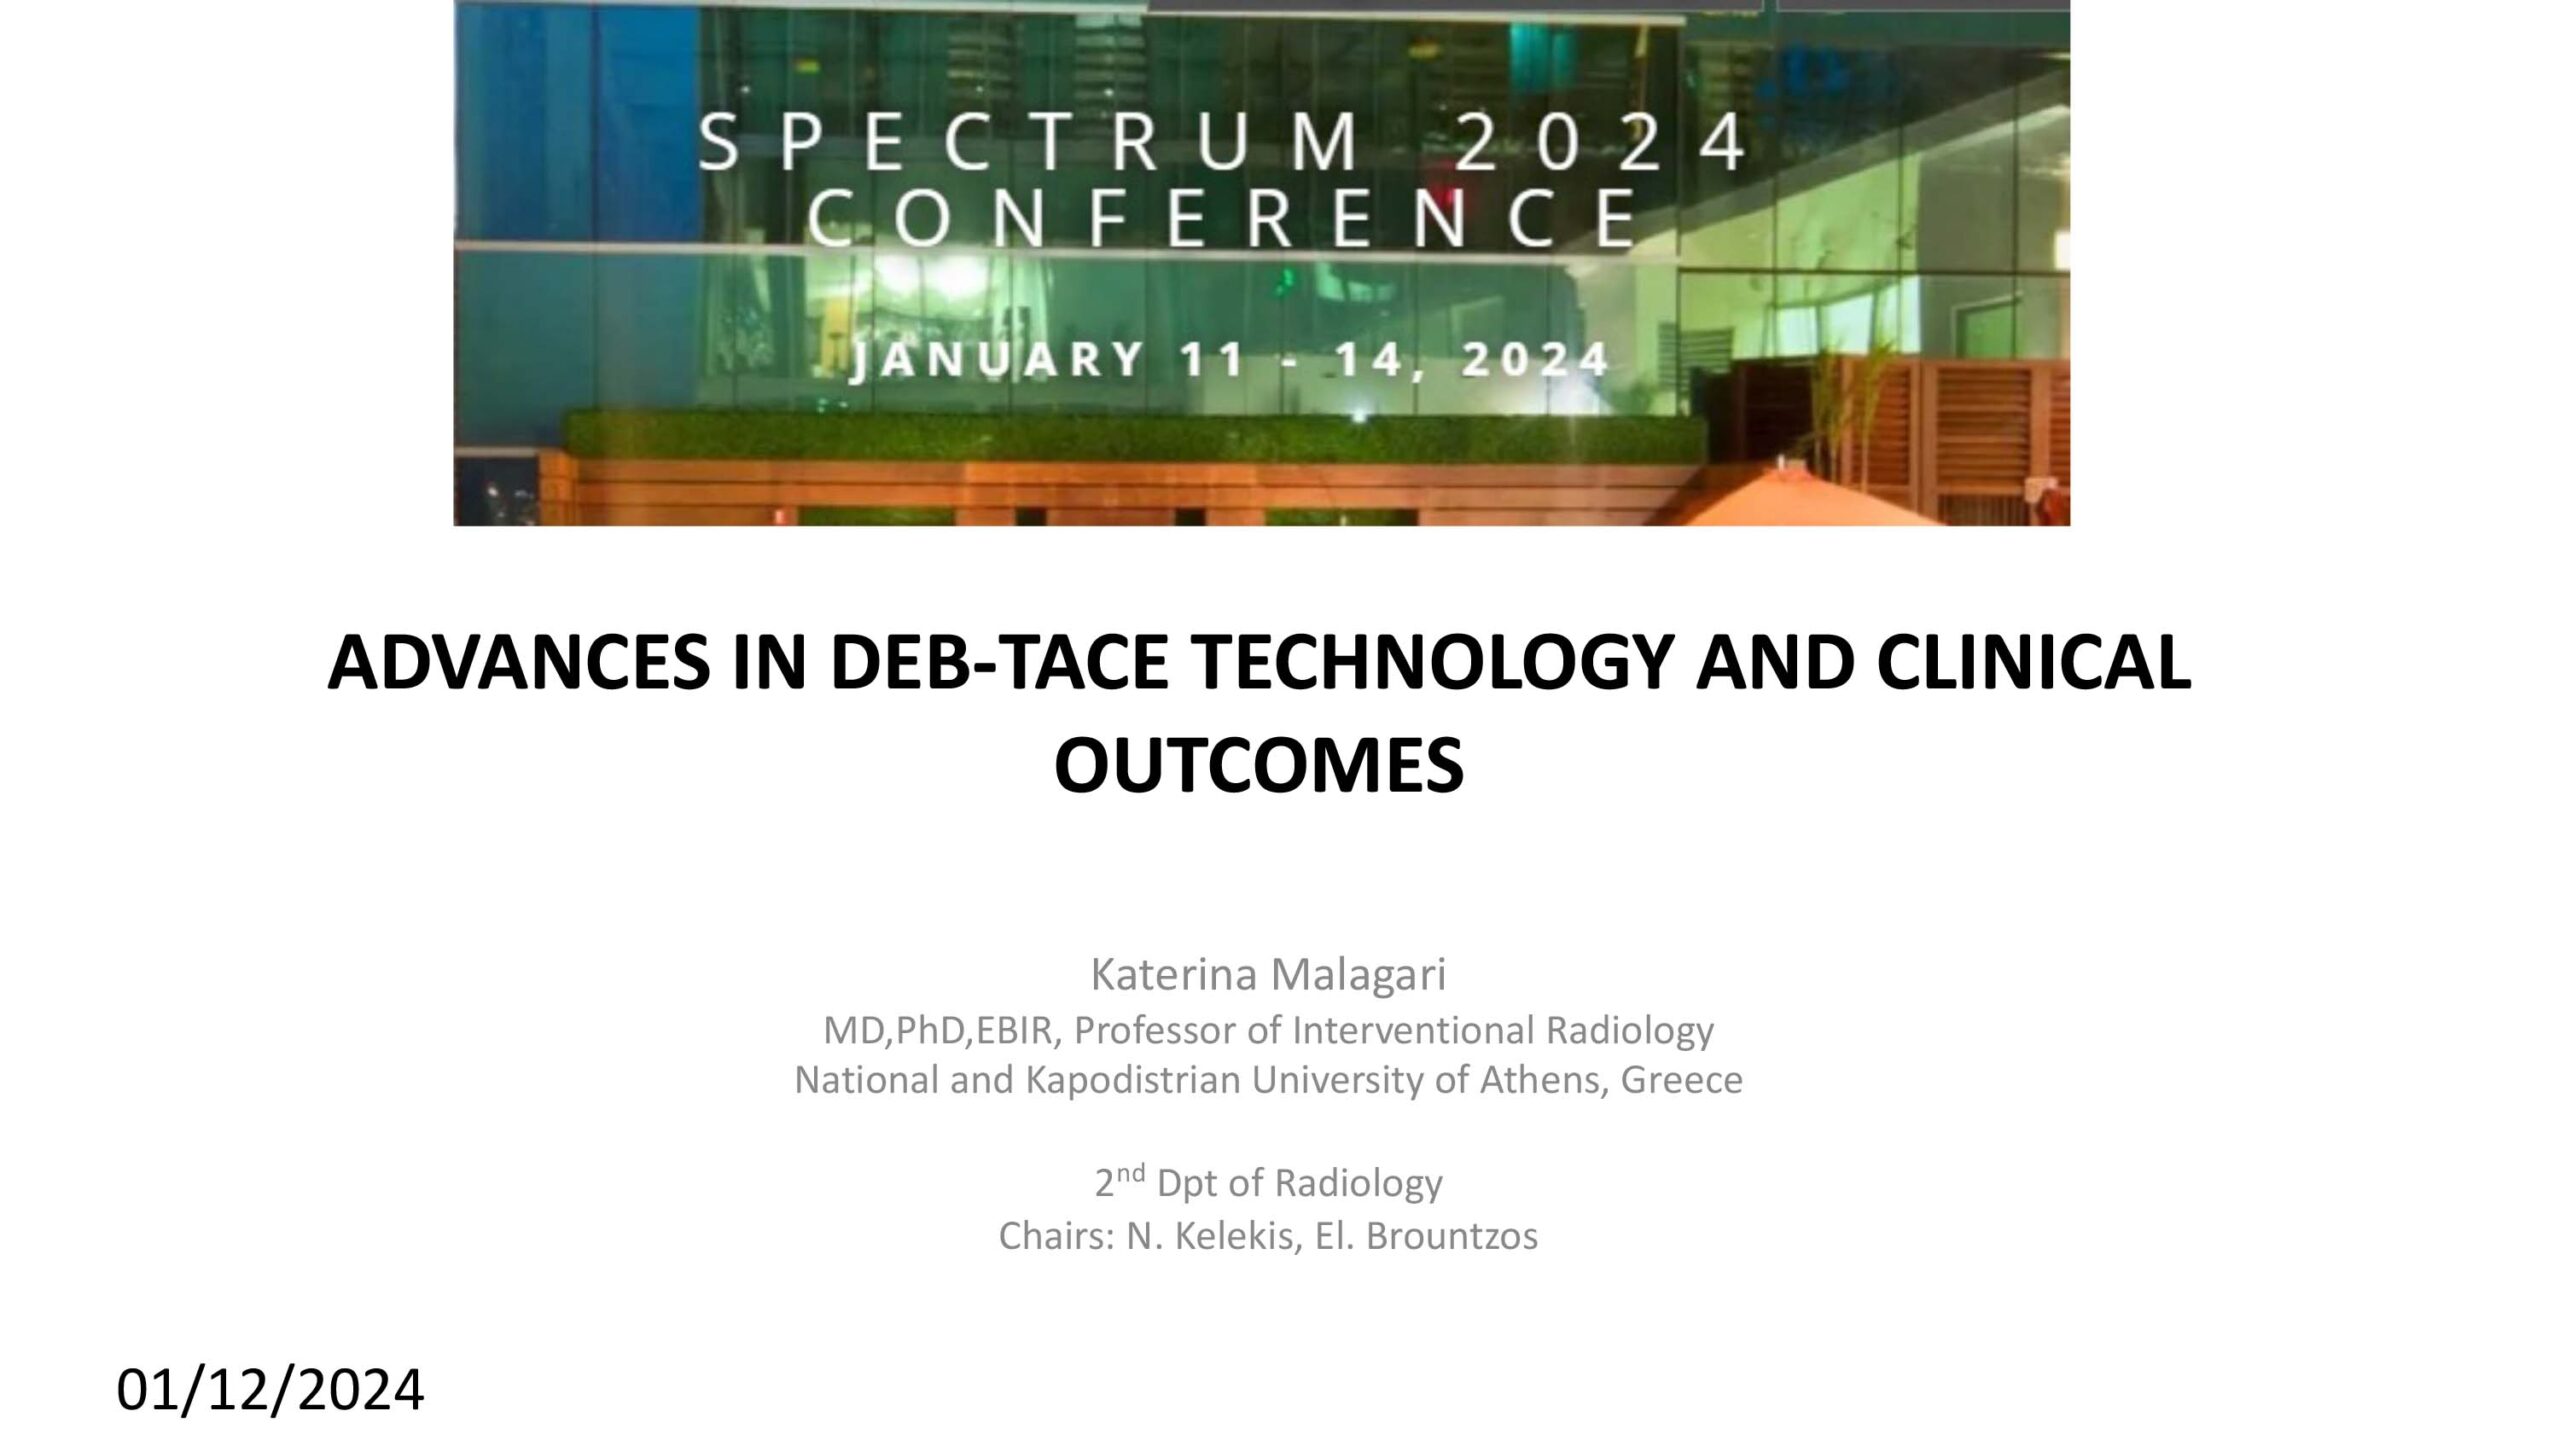 Advances in DEB-TACE technology and clinical outcomes